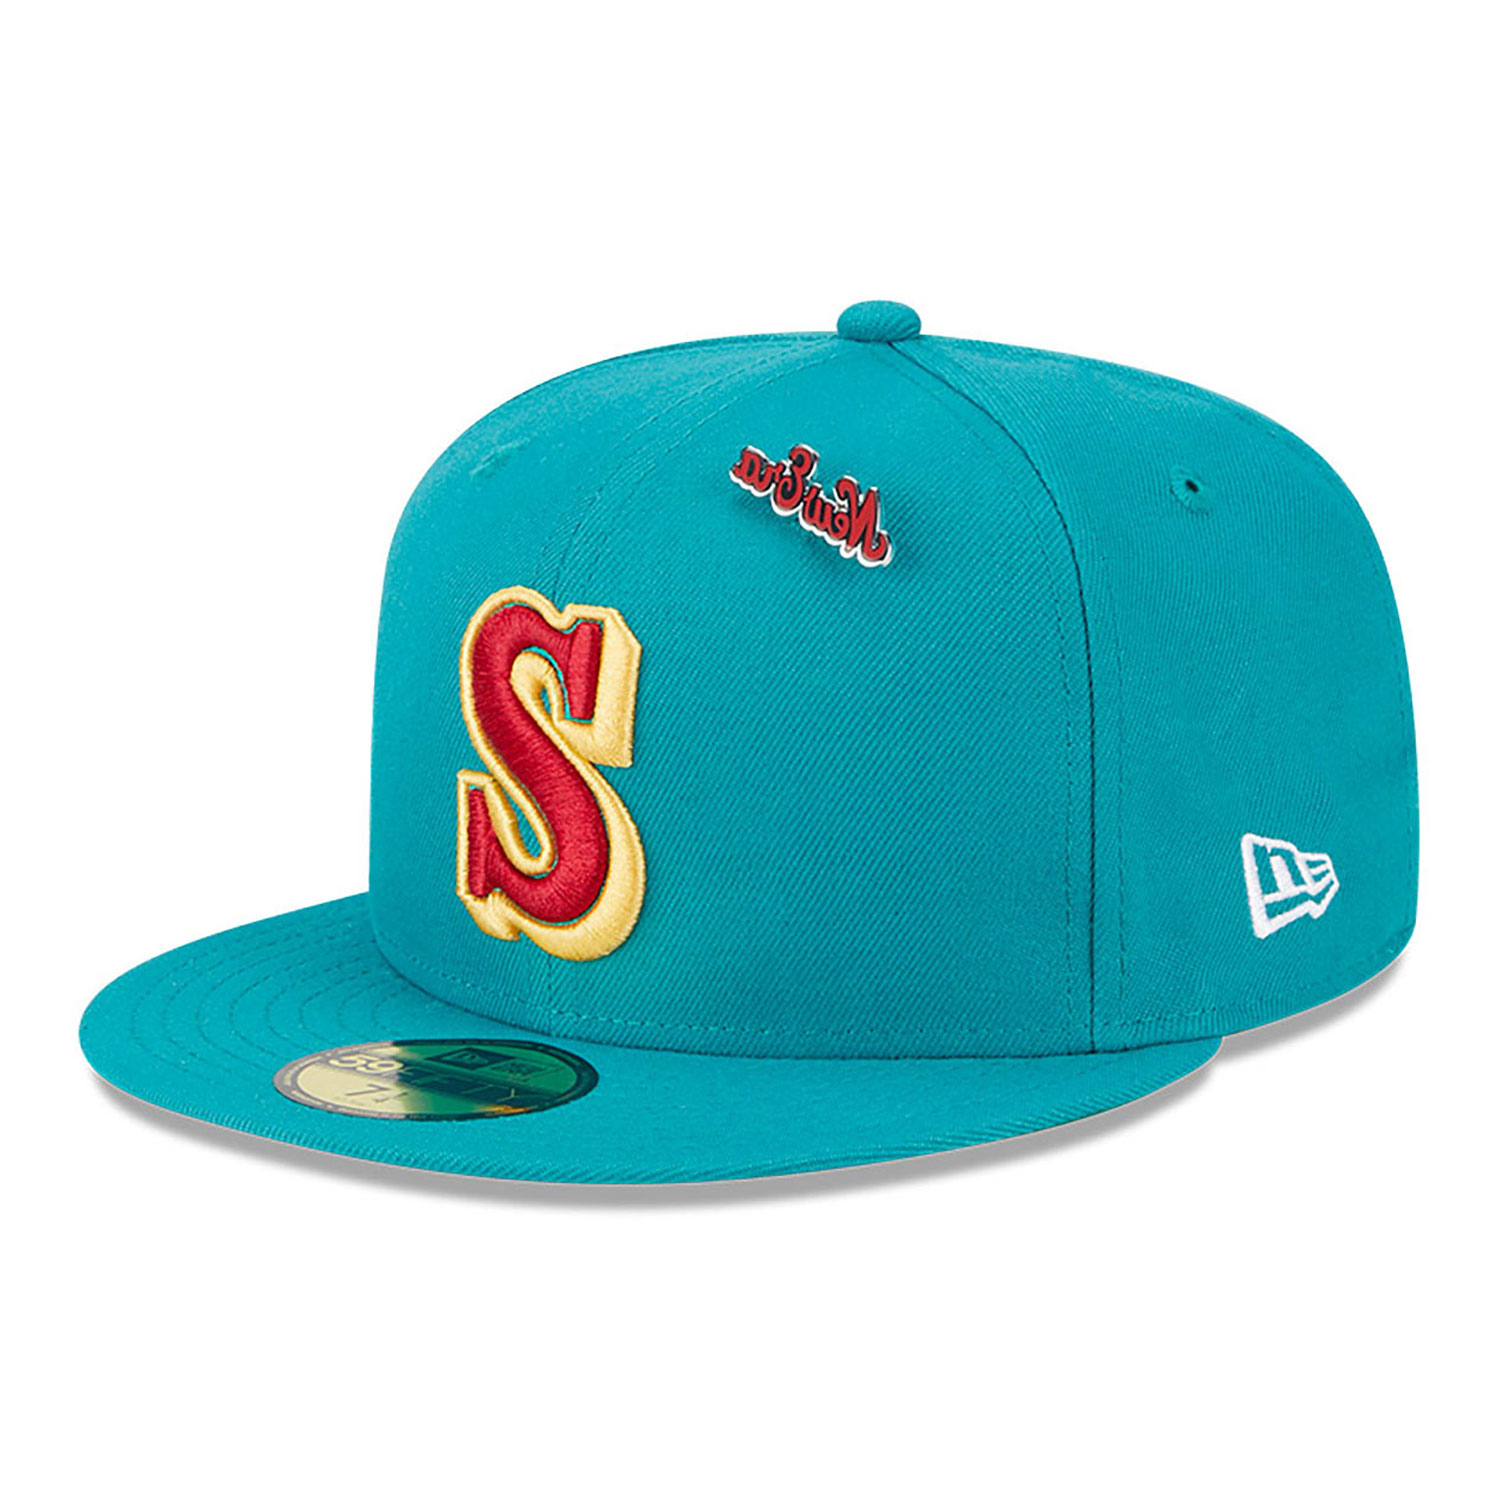 Men's New Era Gray/Teal Seattle Mariners 59FIFTY Fitted Hat